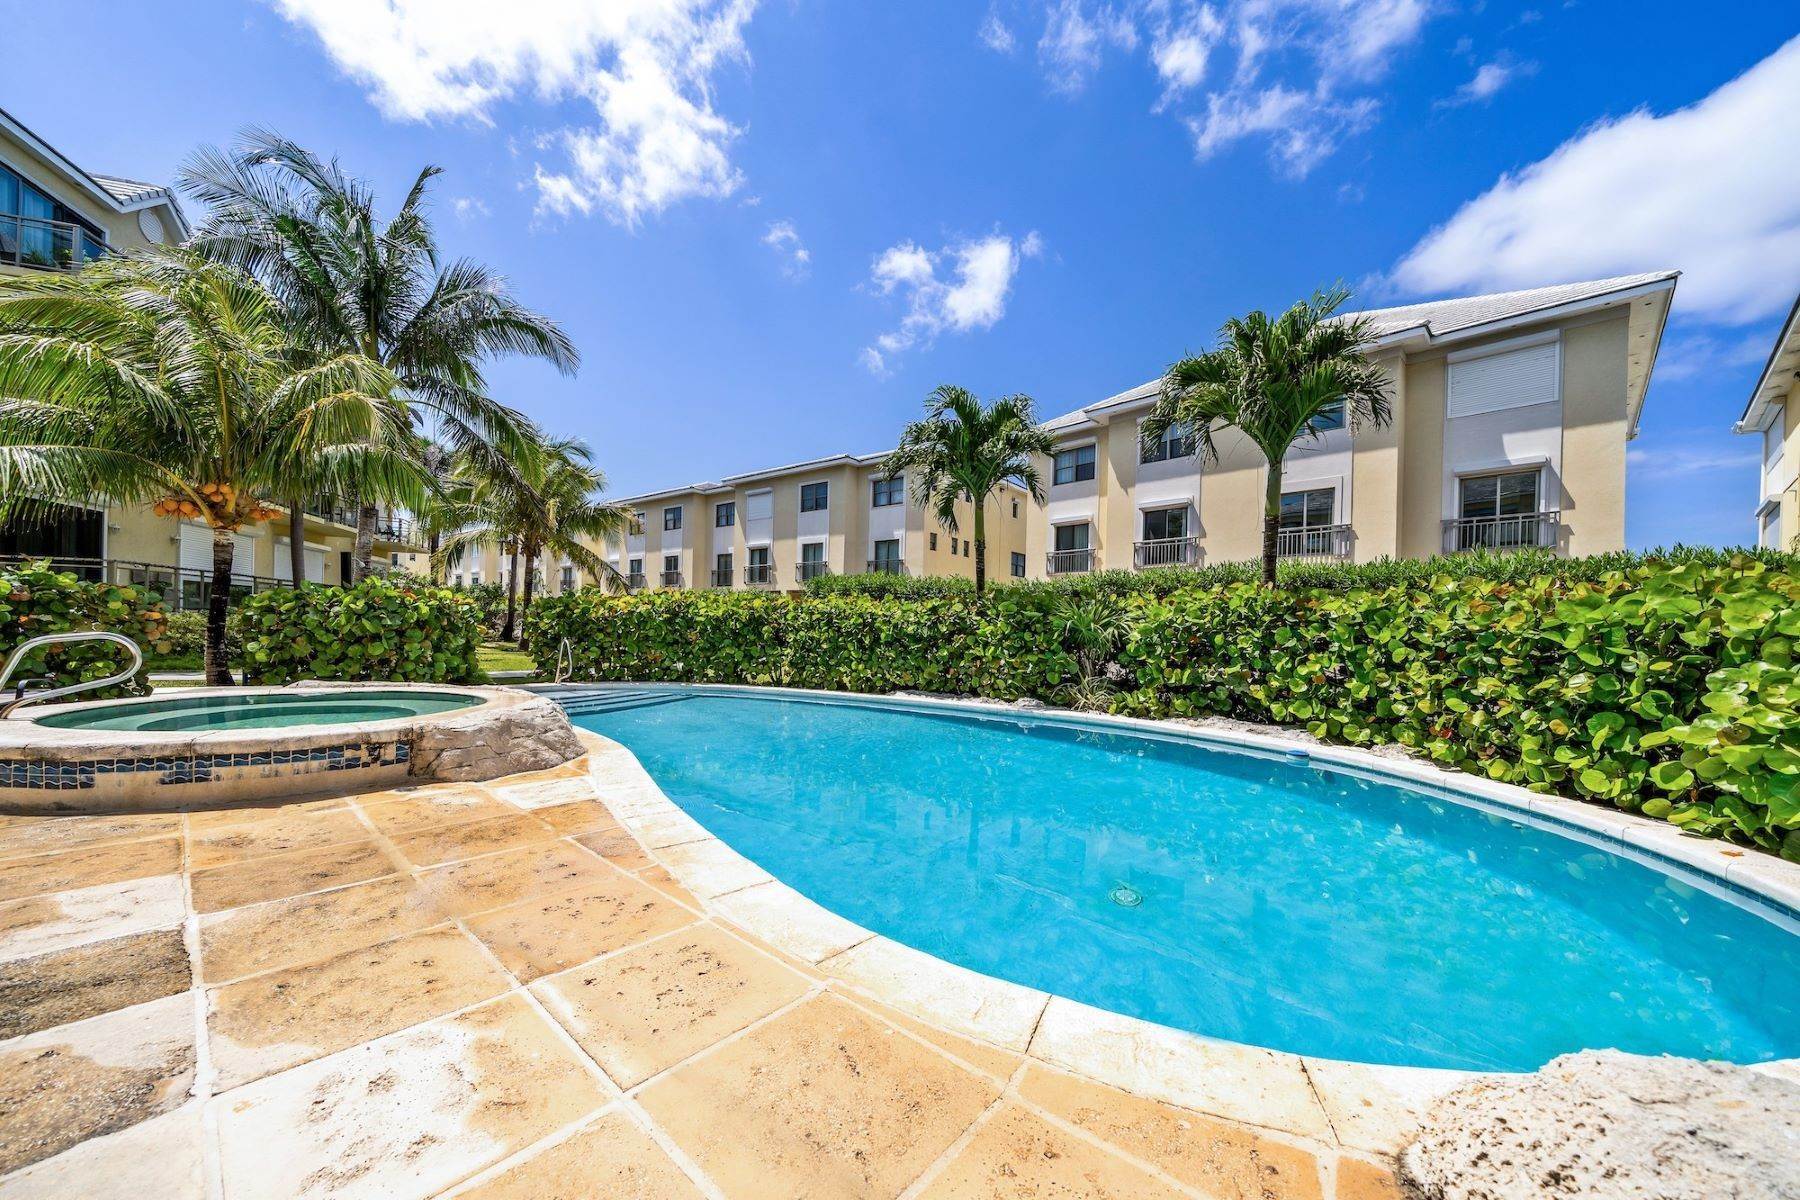 29. townhouses for Sale at Columbus Cove in Love Beach Columbus Cove, Love Beach, Nassau and Paradise Island, Bahamas